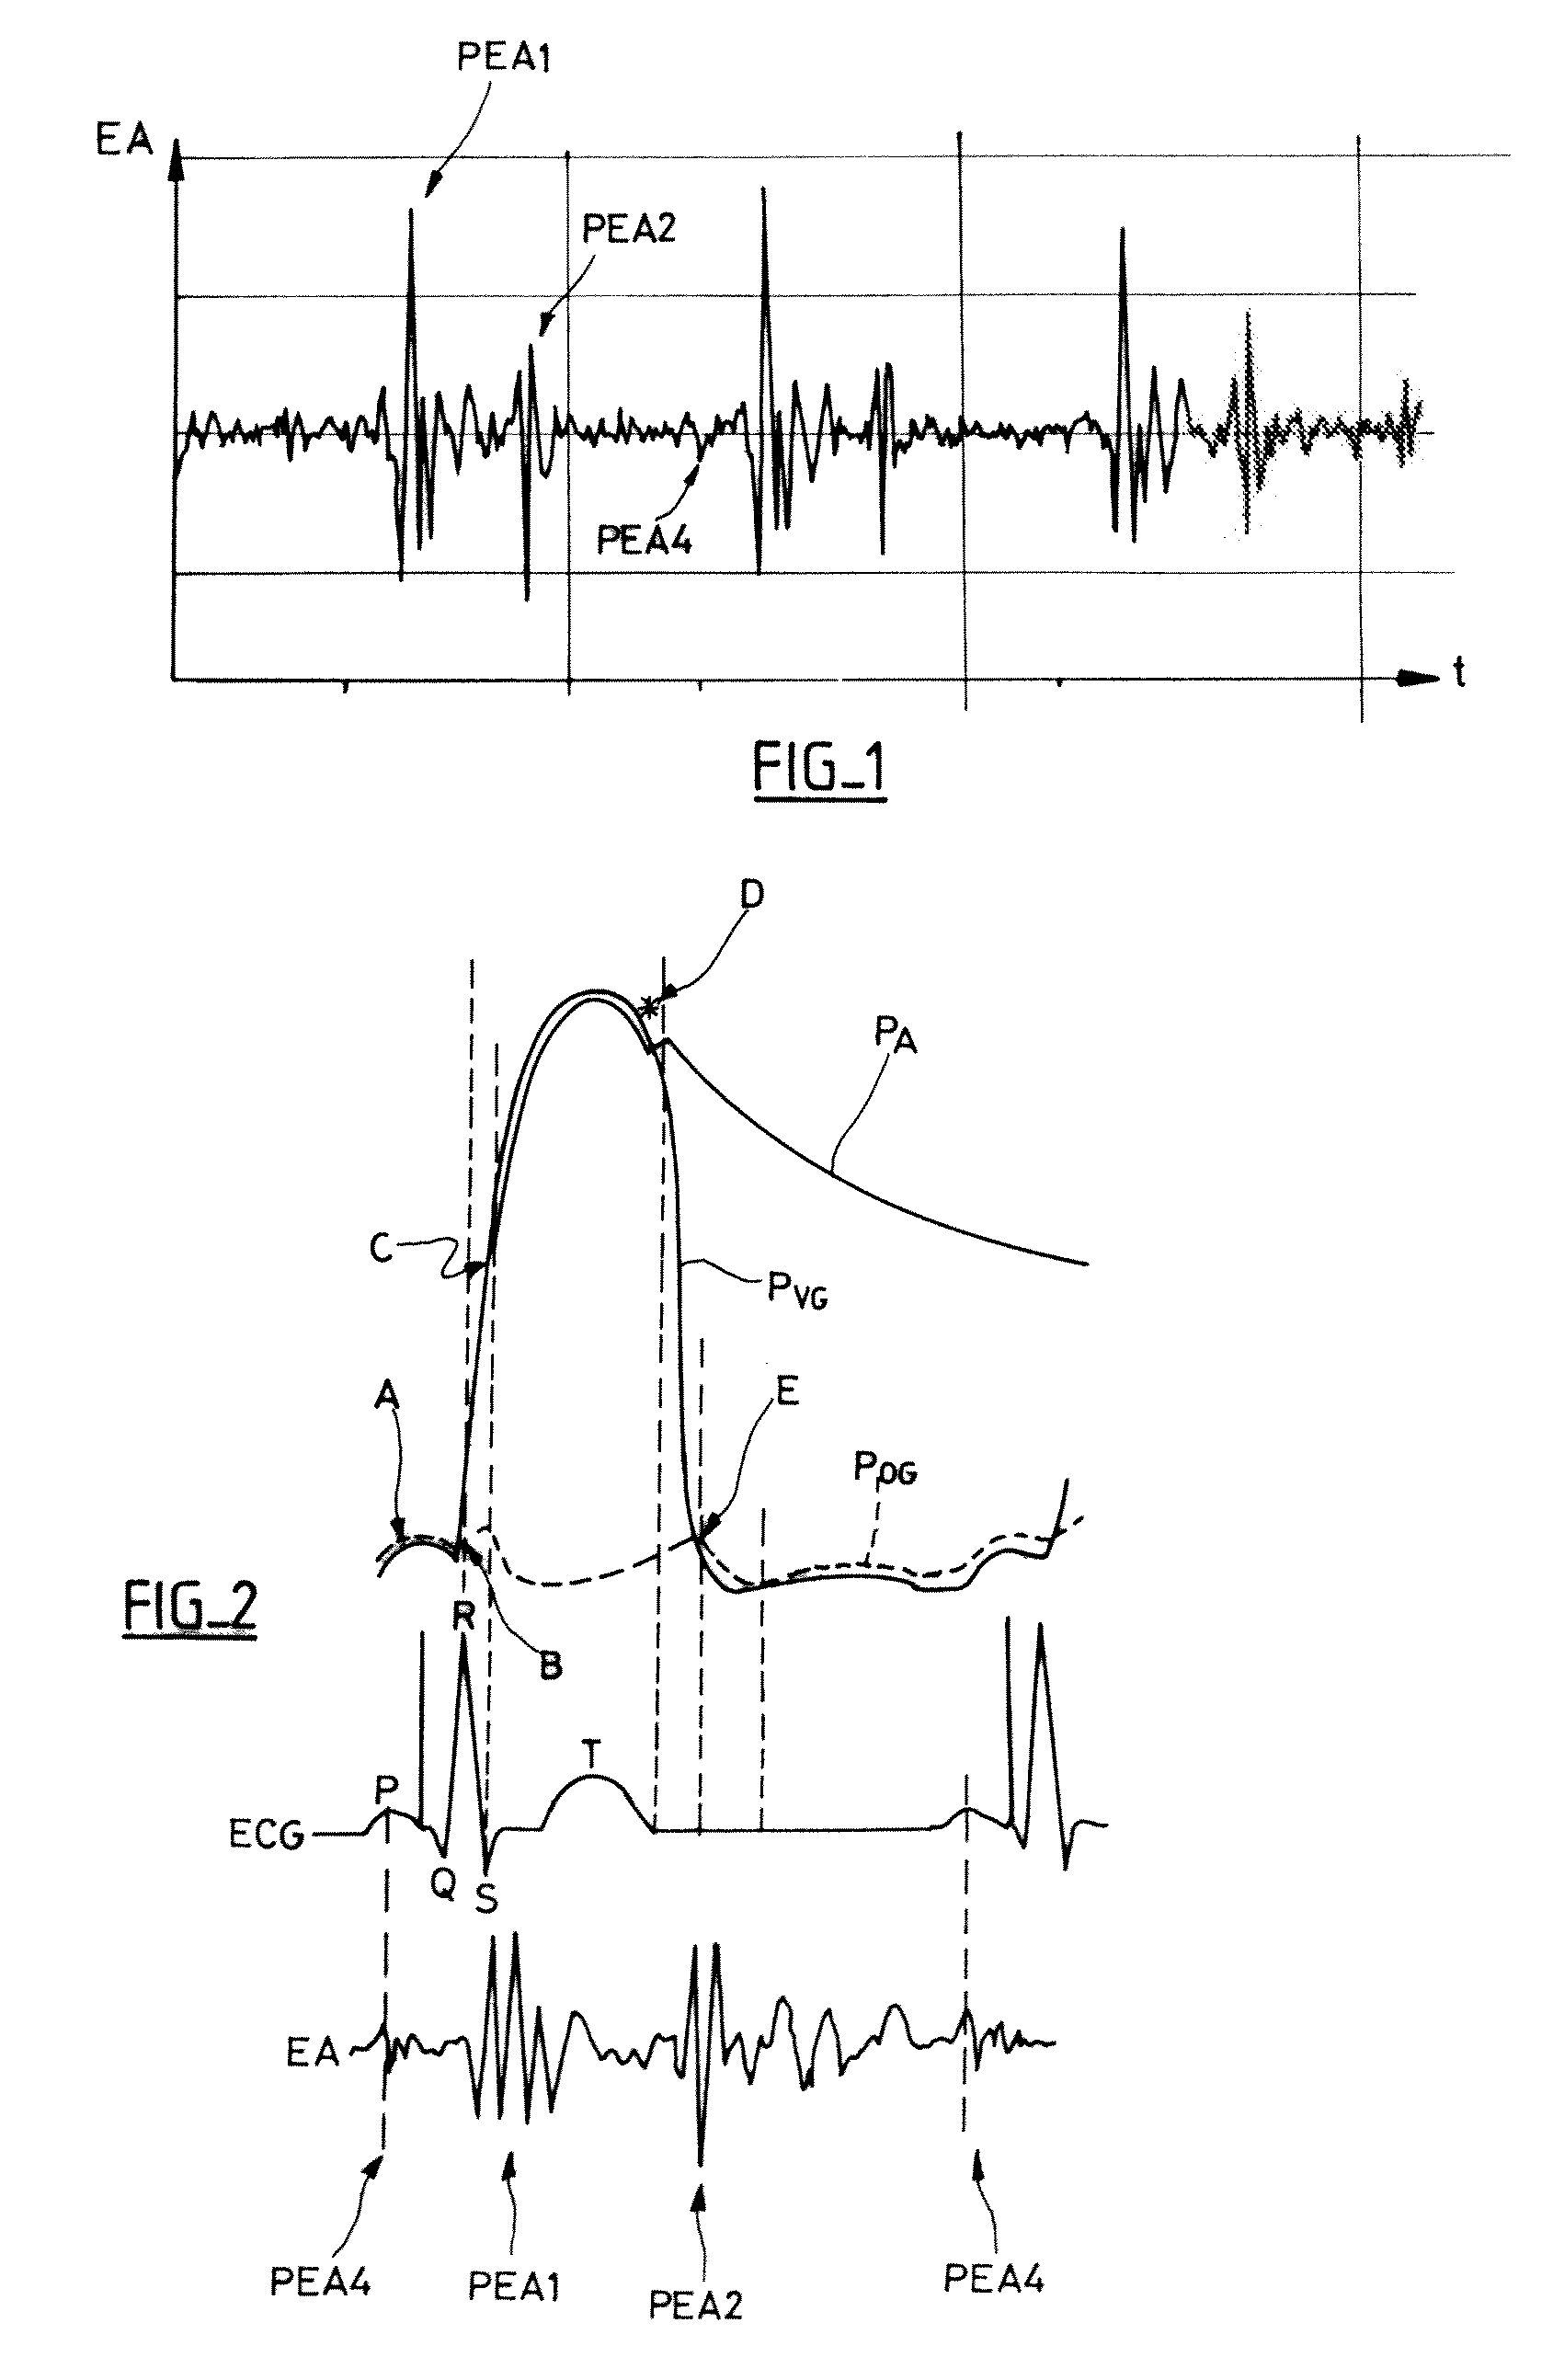 Calculation of the atrioventricular delay for an active implantable metal device